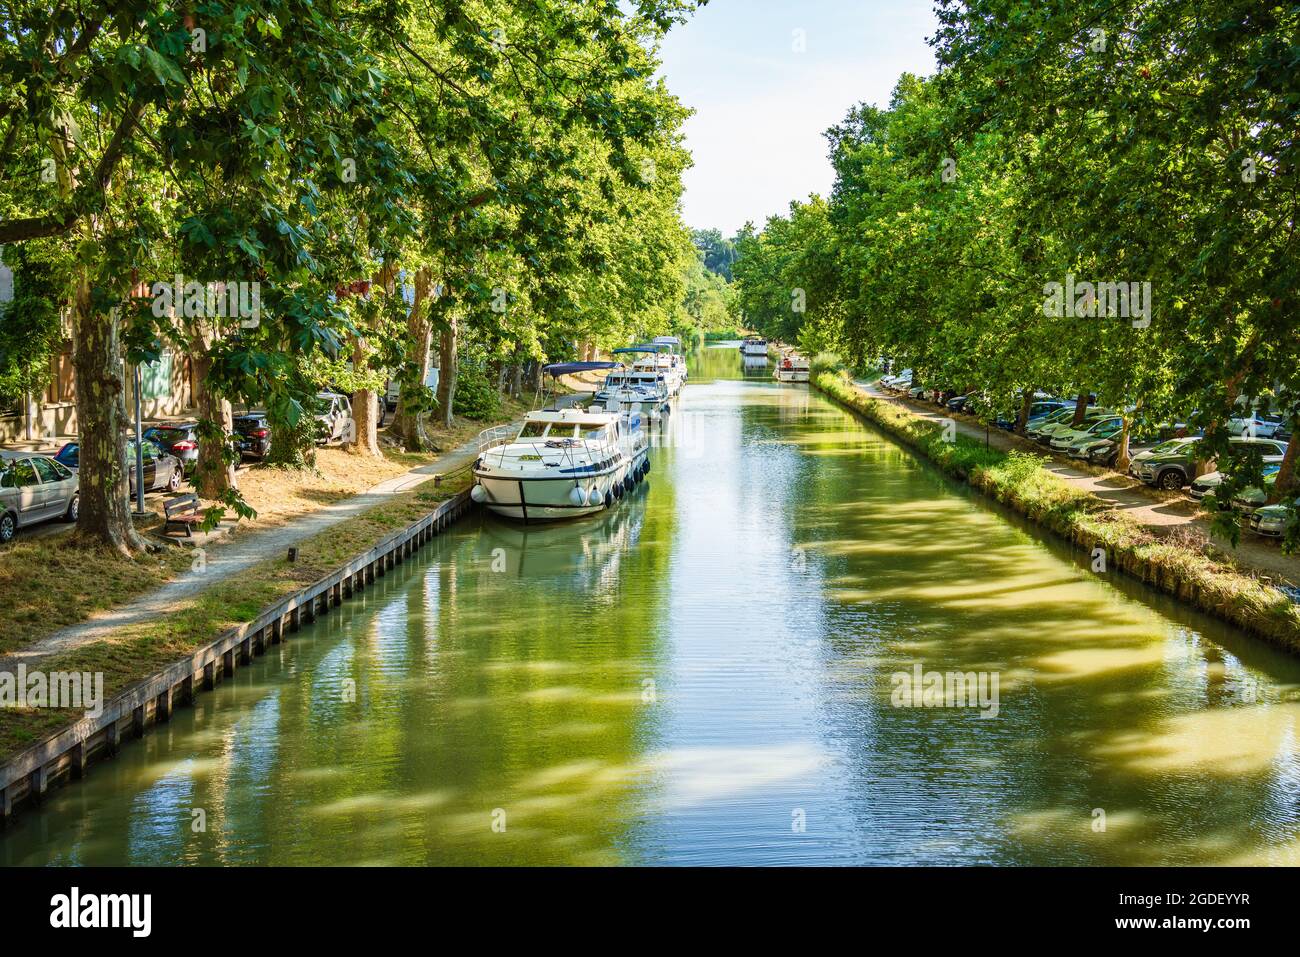 Boats moored in the Canal du Midi in Carcassonne, France. Stock Photo